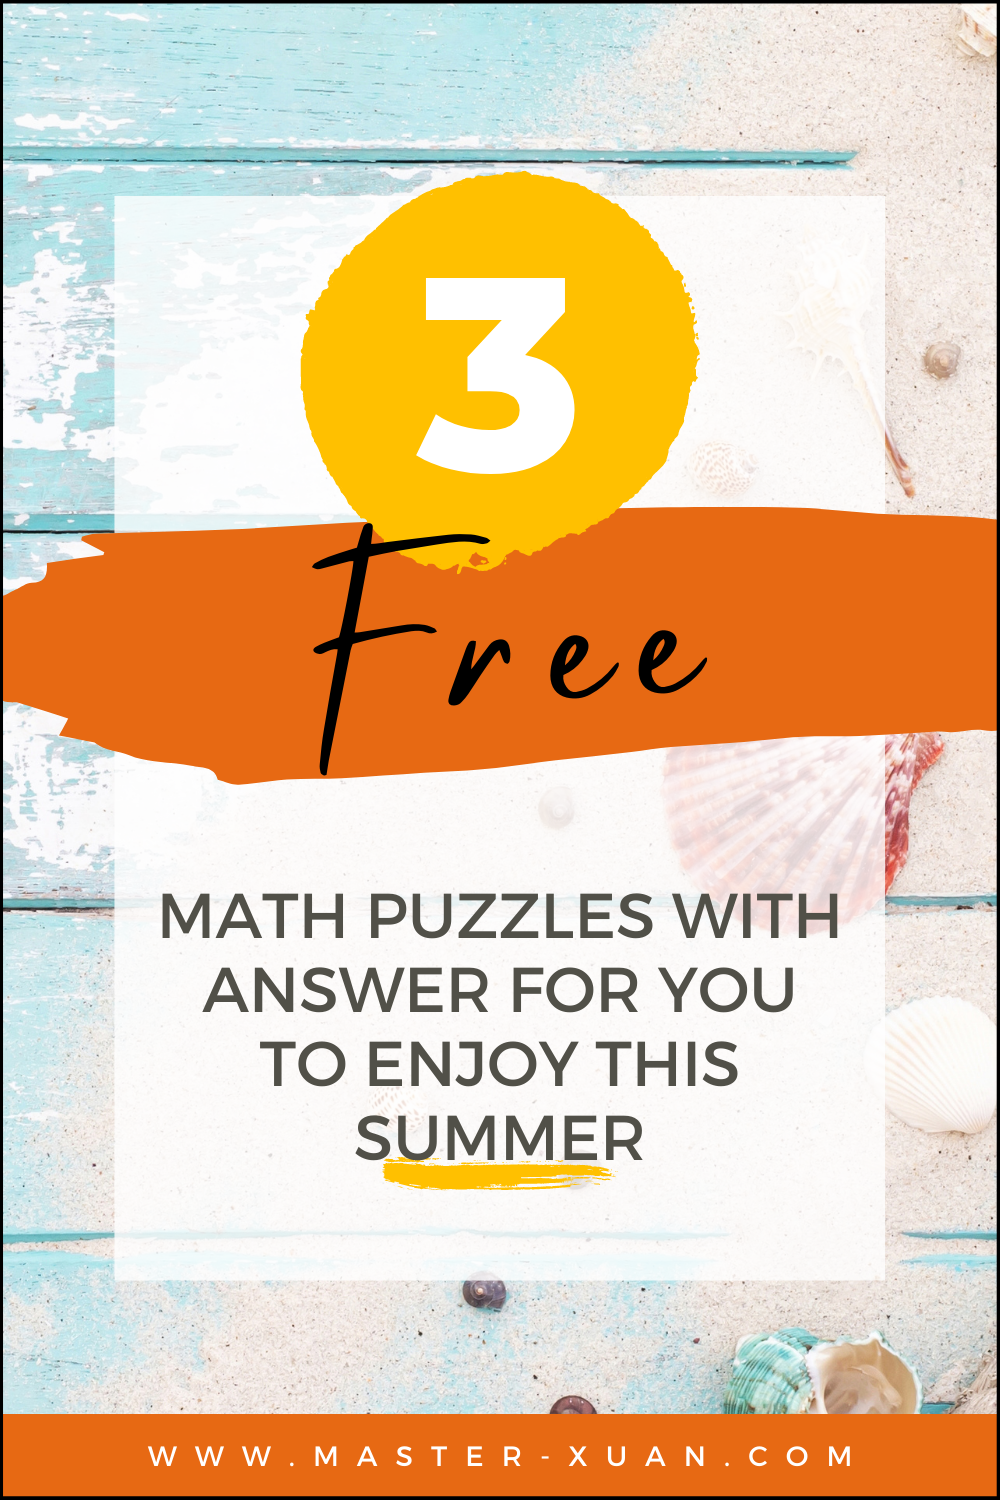 math puzzles with answer for summer